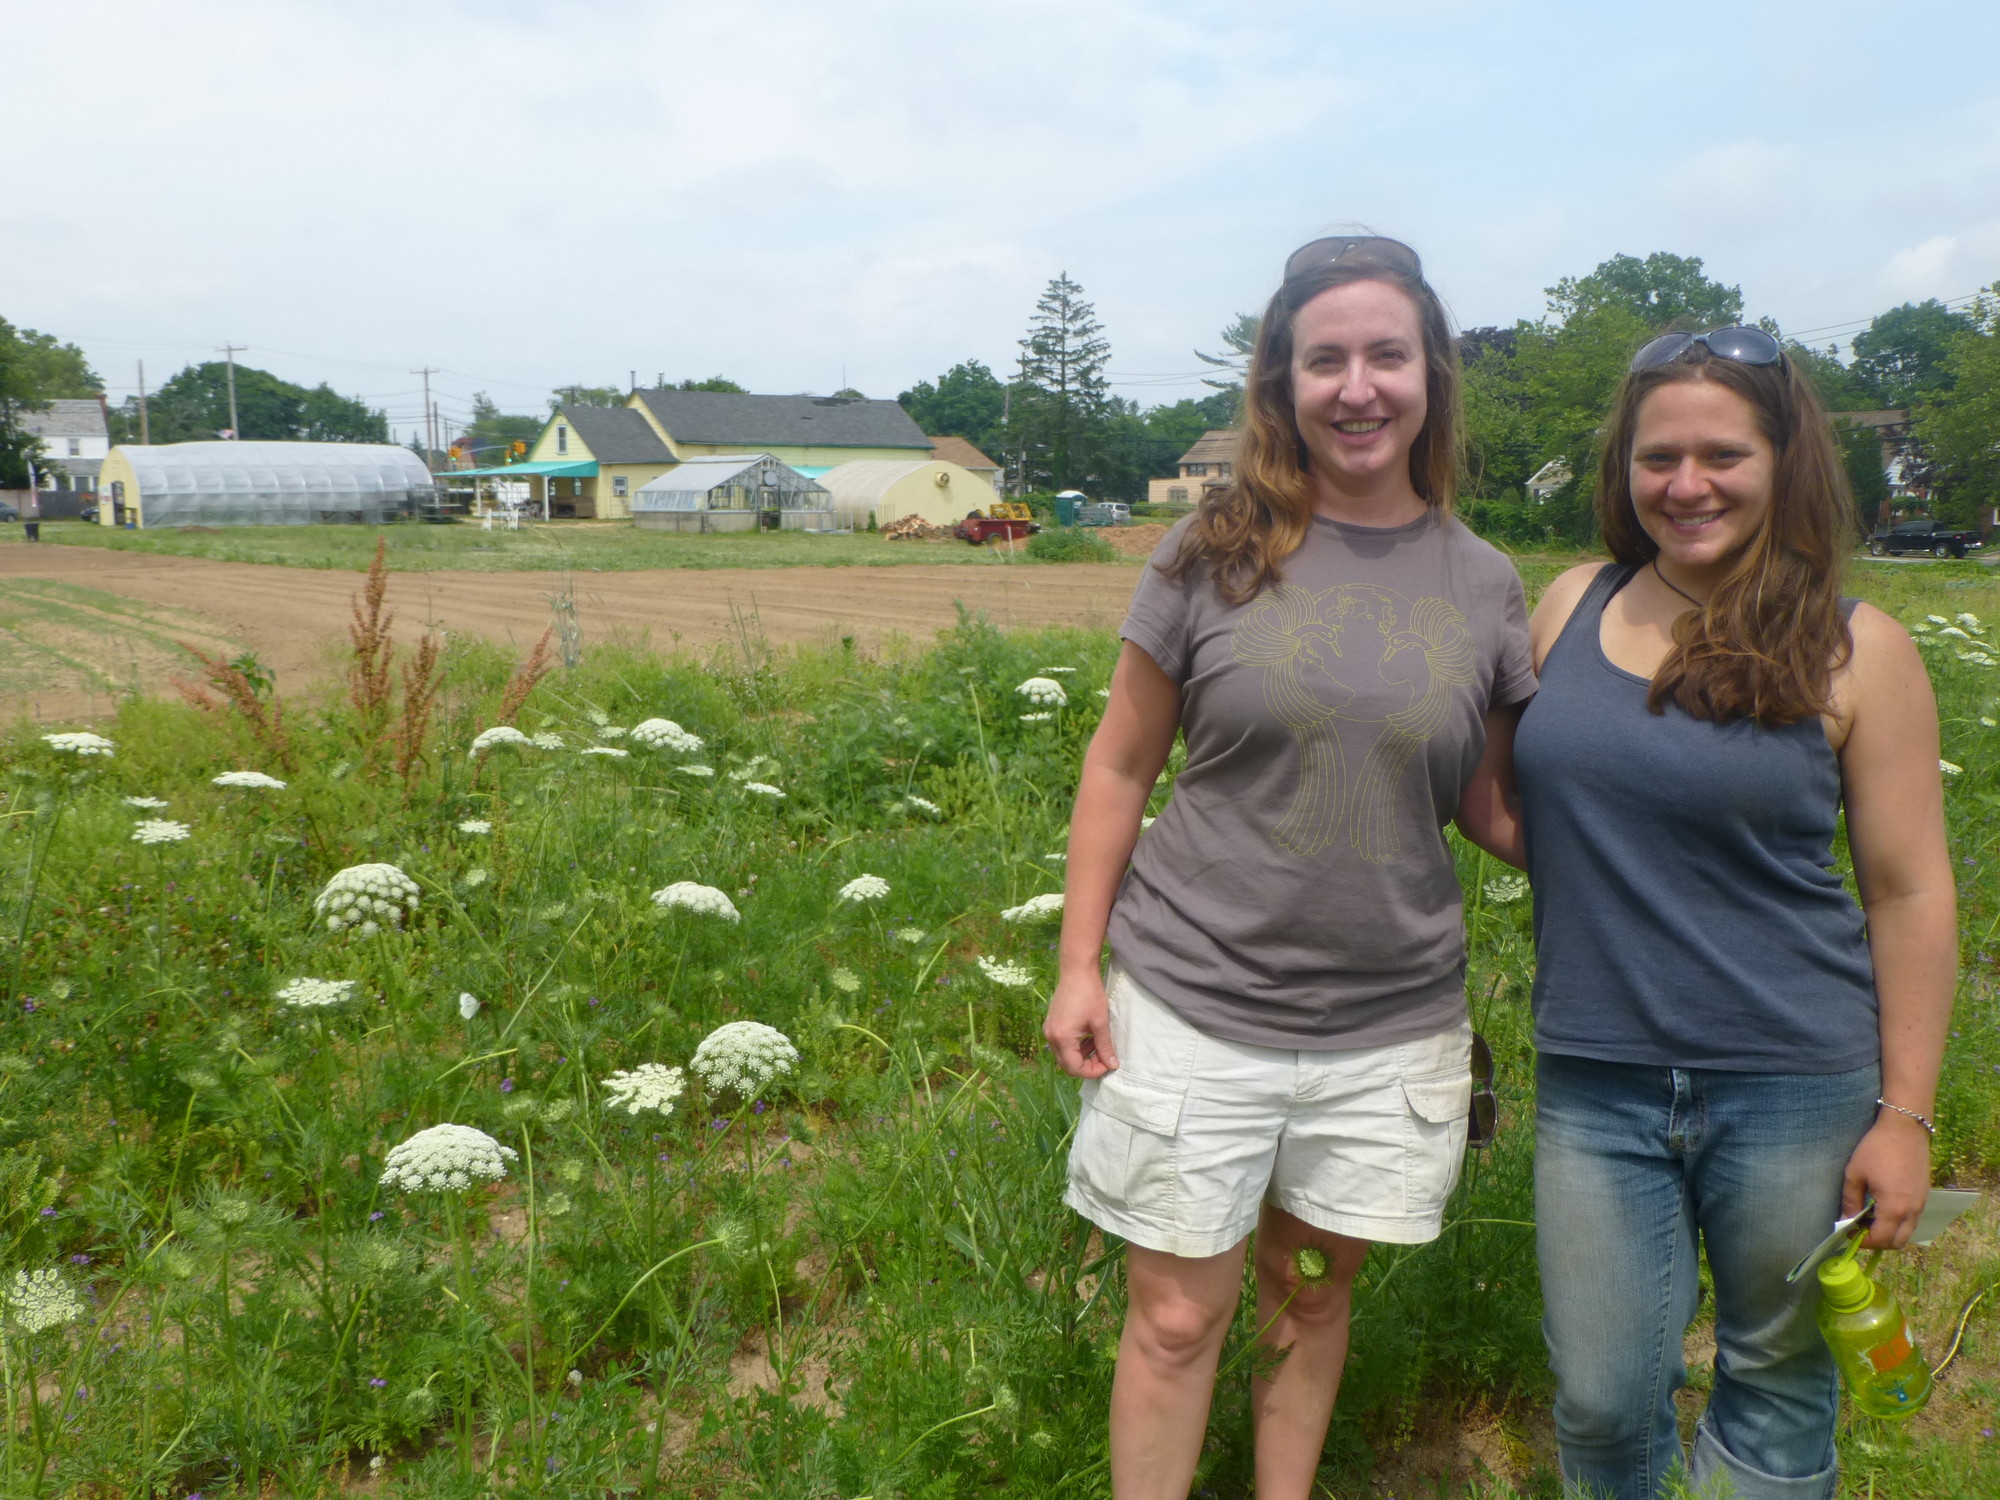 Corcoran, left, and Schaefer said they hope to turn this labor of love into a full-fledged organic farm in the coming years.